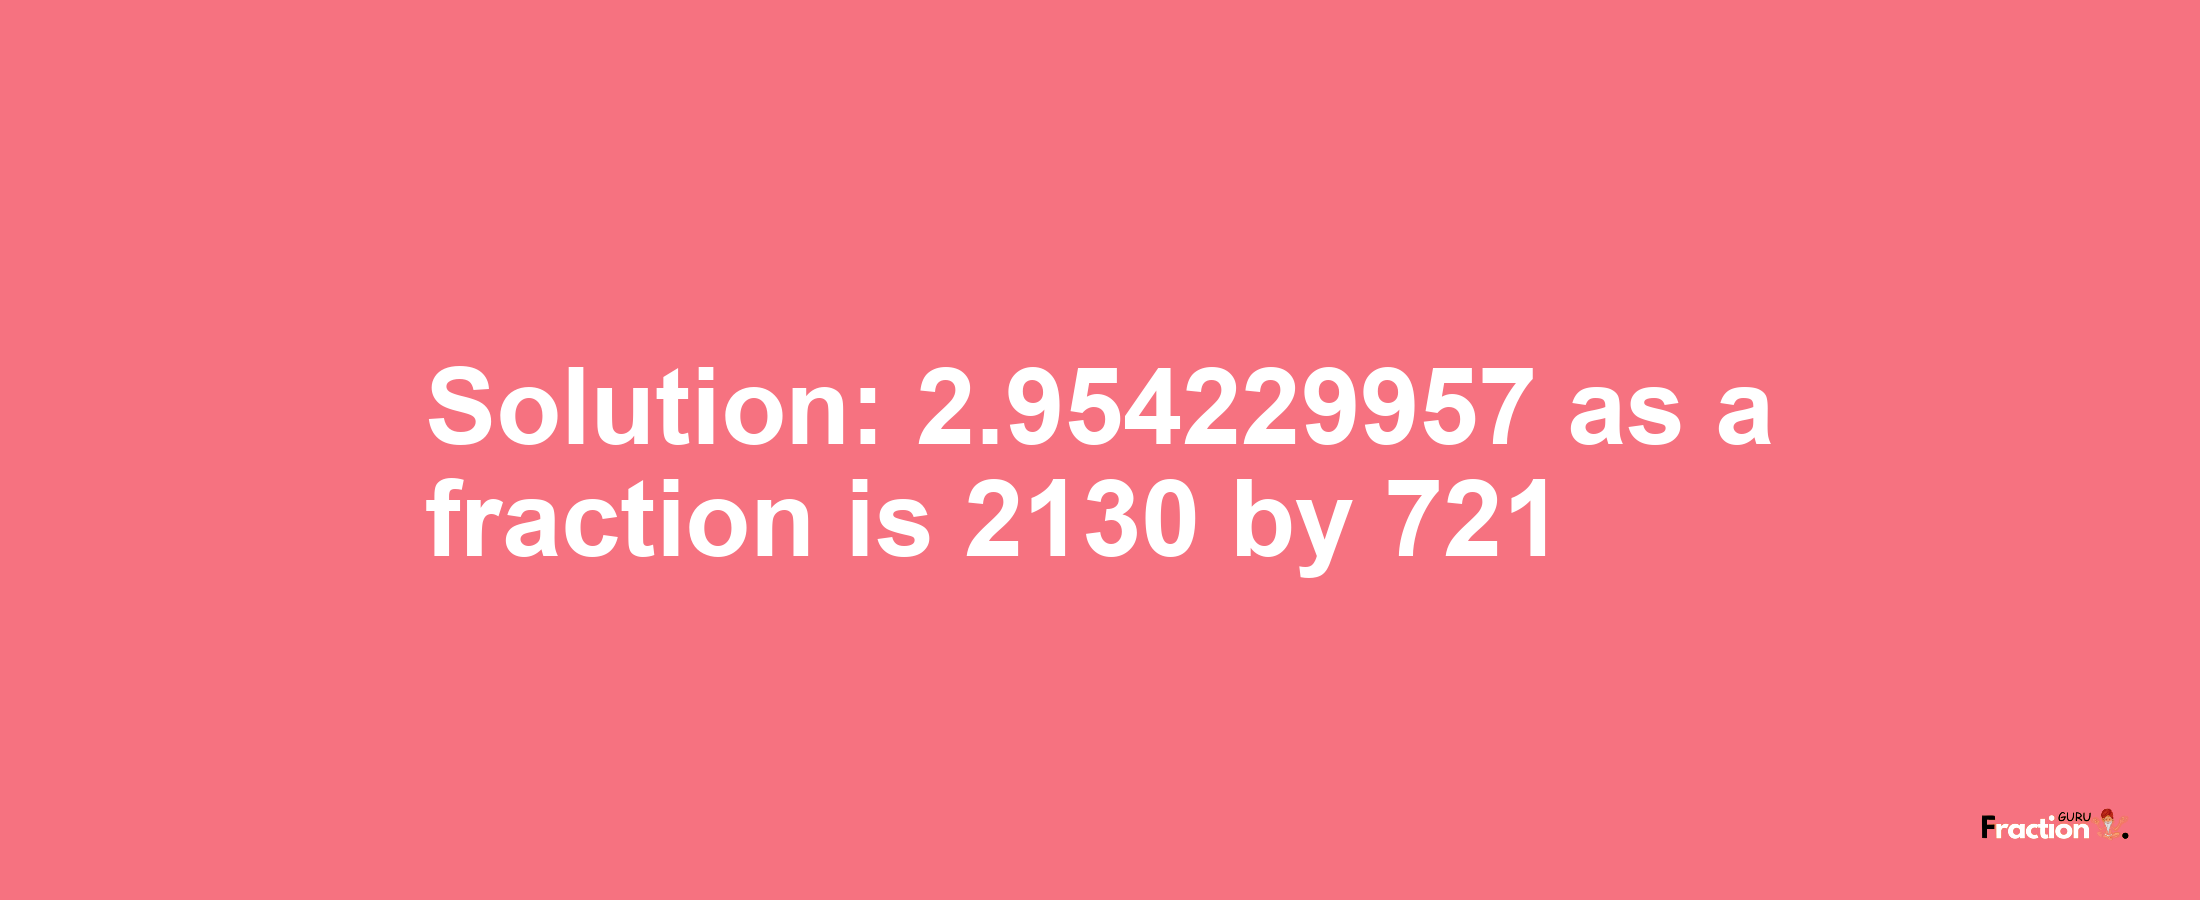 Solution:2.954229957 as a fraction is 2130/721